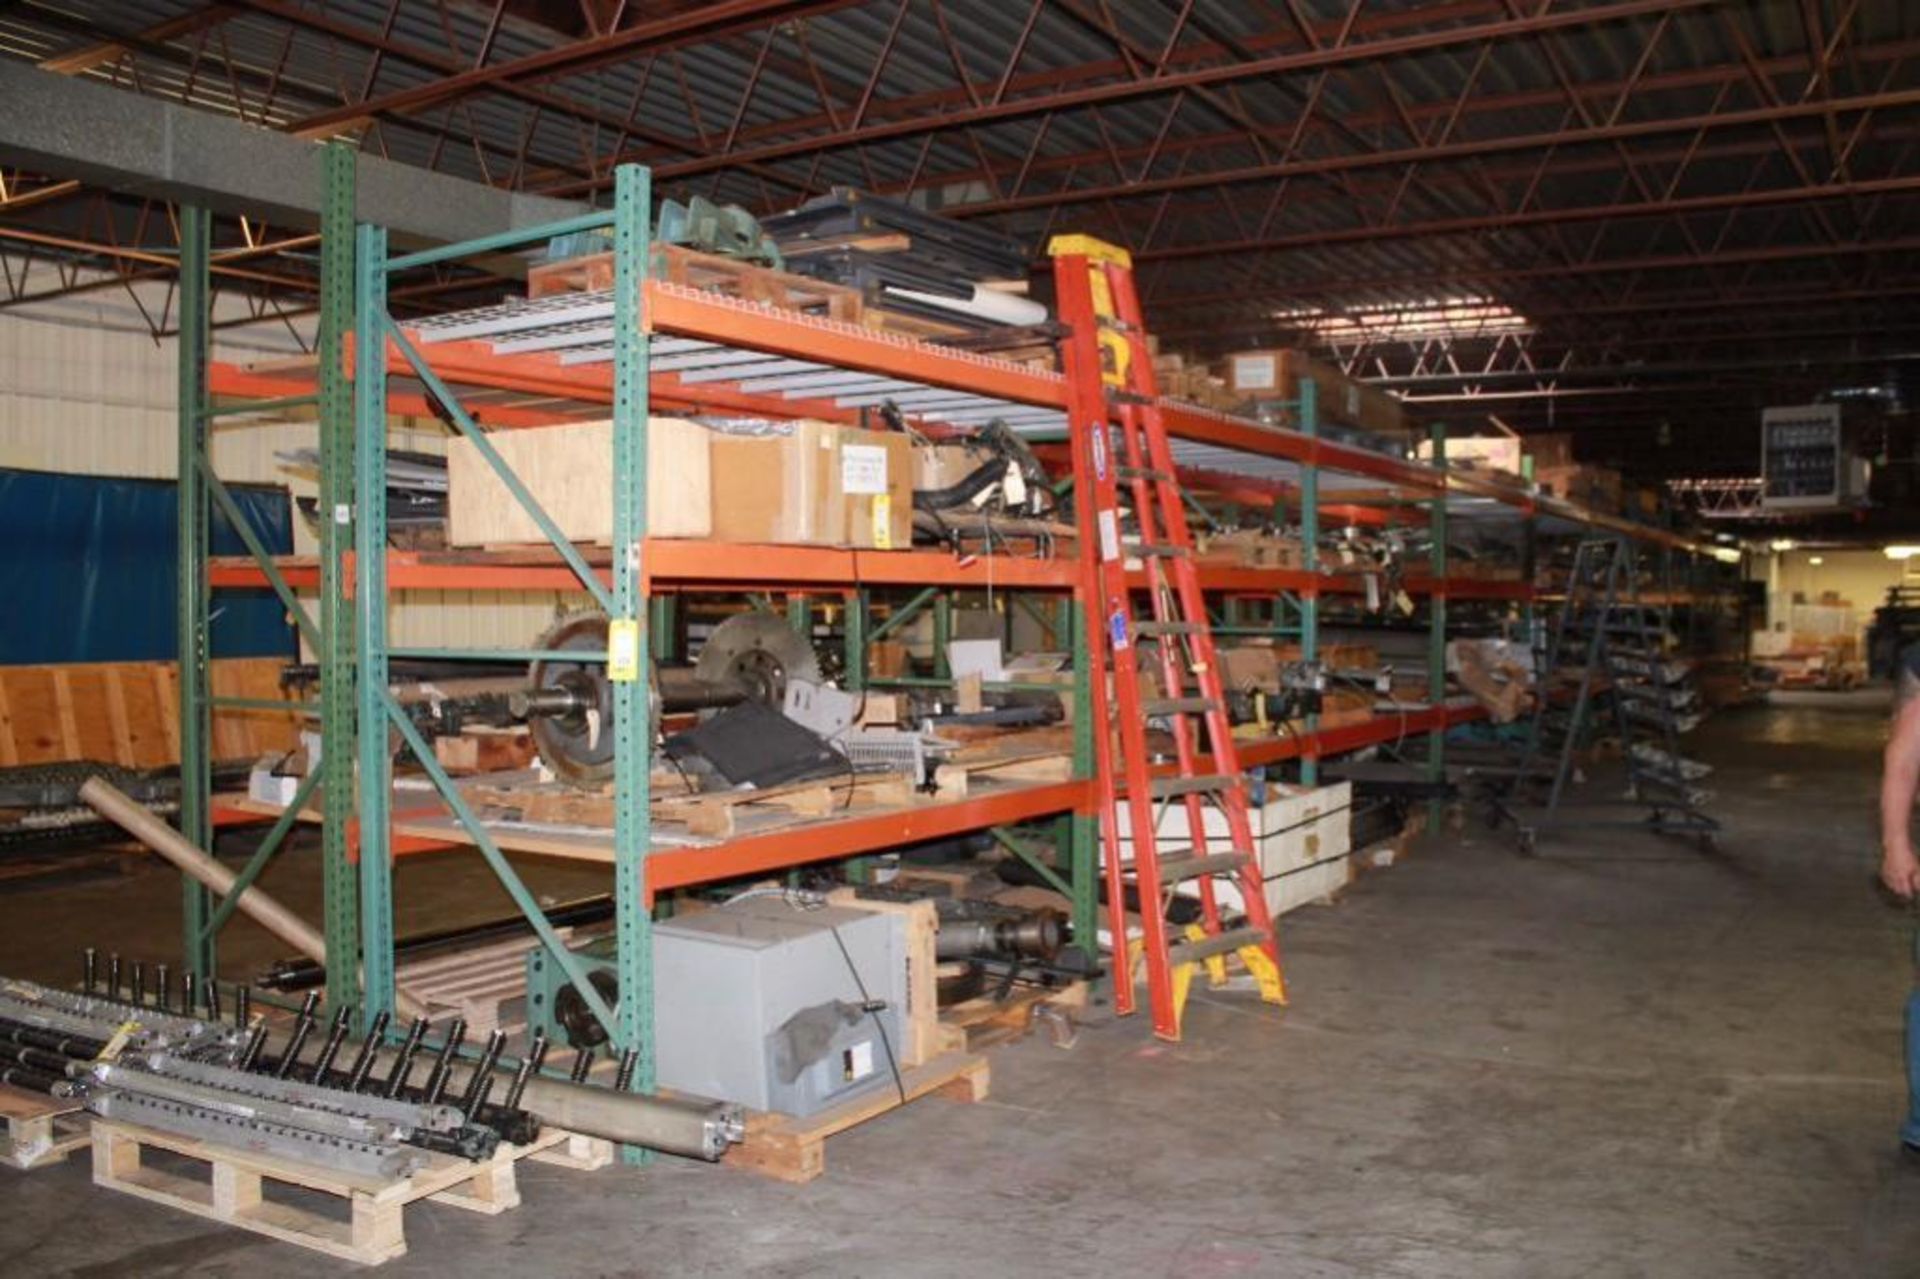 LOT: (10) Sections 9 ft. x 8 ft. x 48 in. Pallet Rack (delay removal)